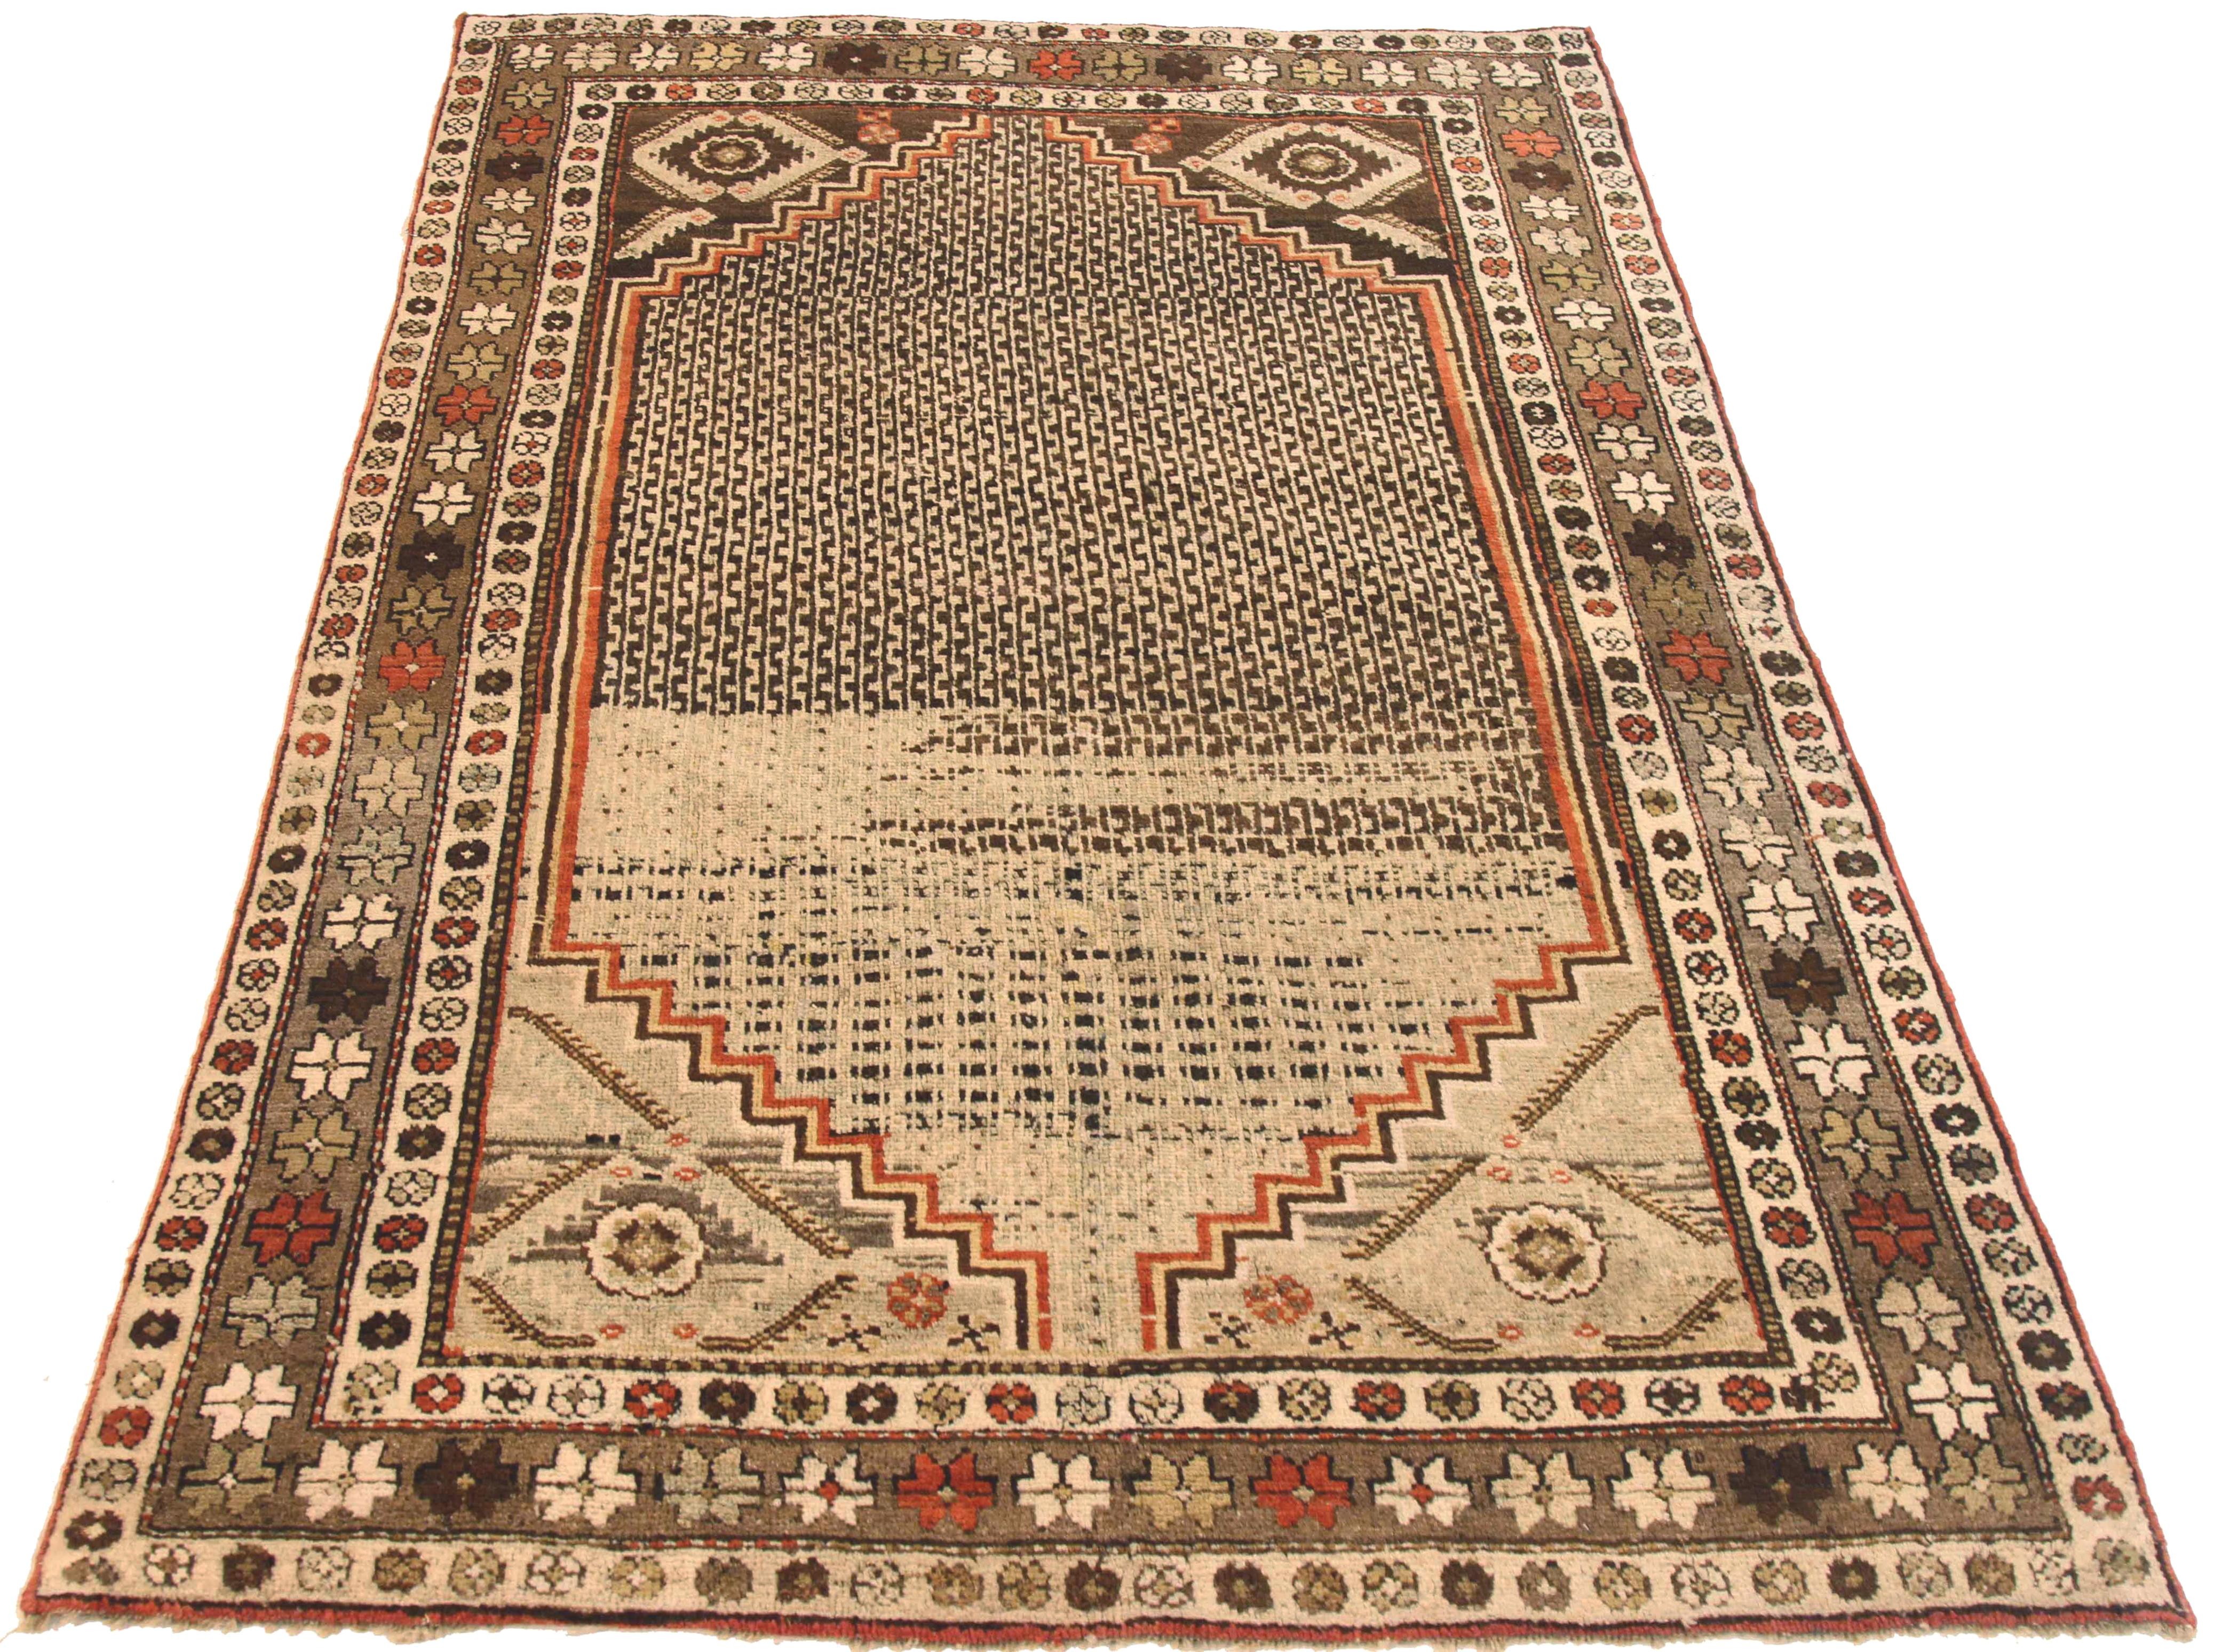 Antique Persian area rug handwoven from the finest sheep’s wool. It’s colored with all-natural vegetable dyes that are safe for humans and pets. It’s a traditional Koliai design handwoven by expert artisans. It’s a lovely area rug that can be